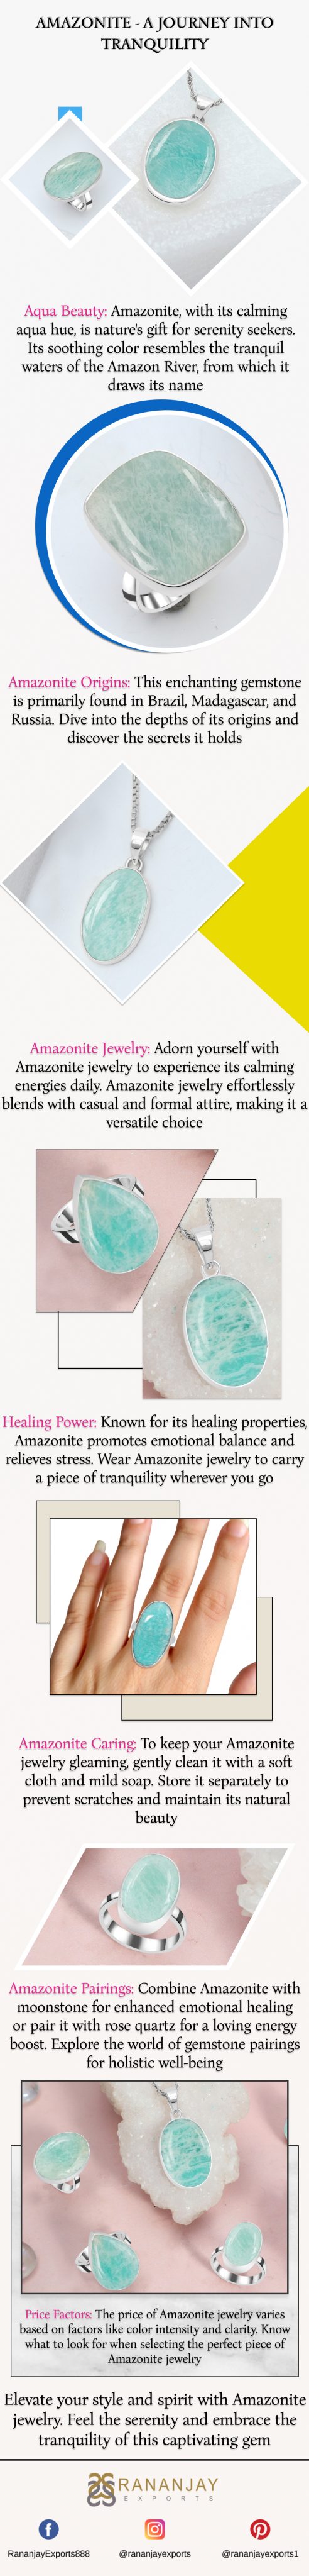 Amazonite - A Journey into Tranquility